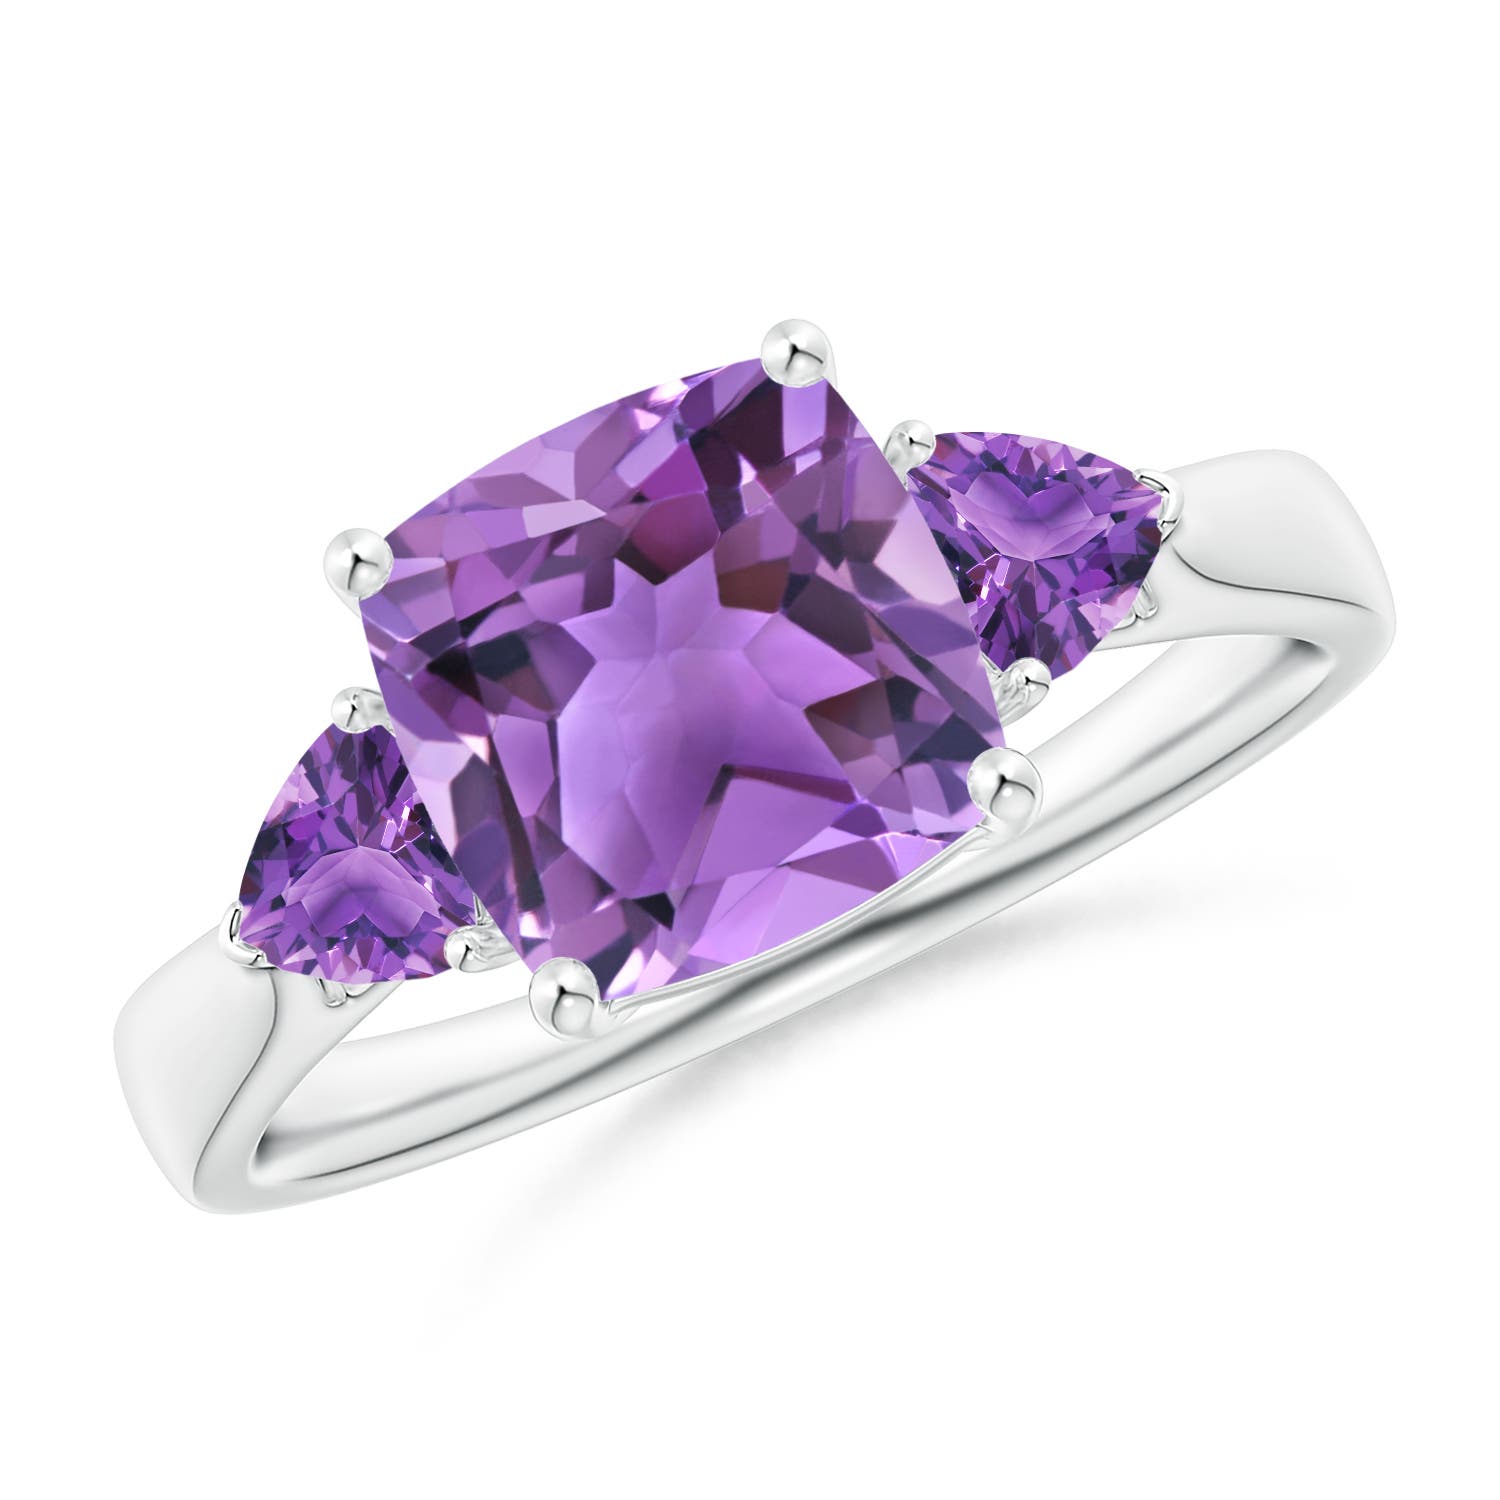 AA - Amethyst / 2.6 CT / 14 KT White Gold